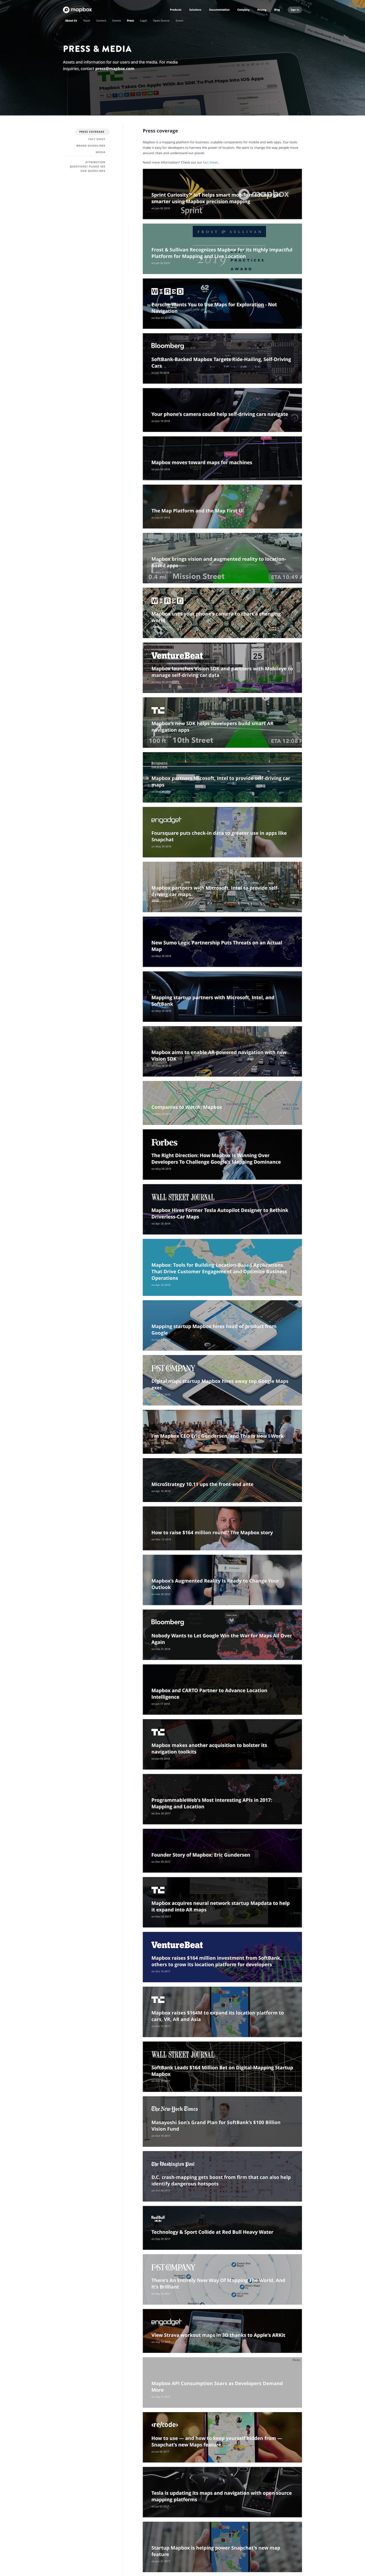 Screenshot of the Press & Media page from the Mapbox website.